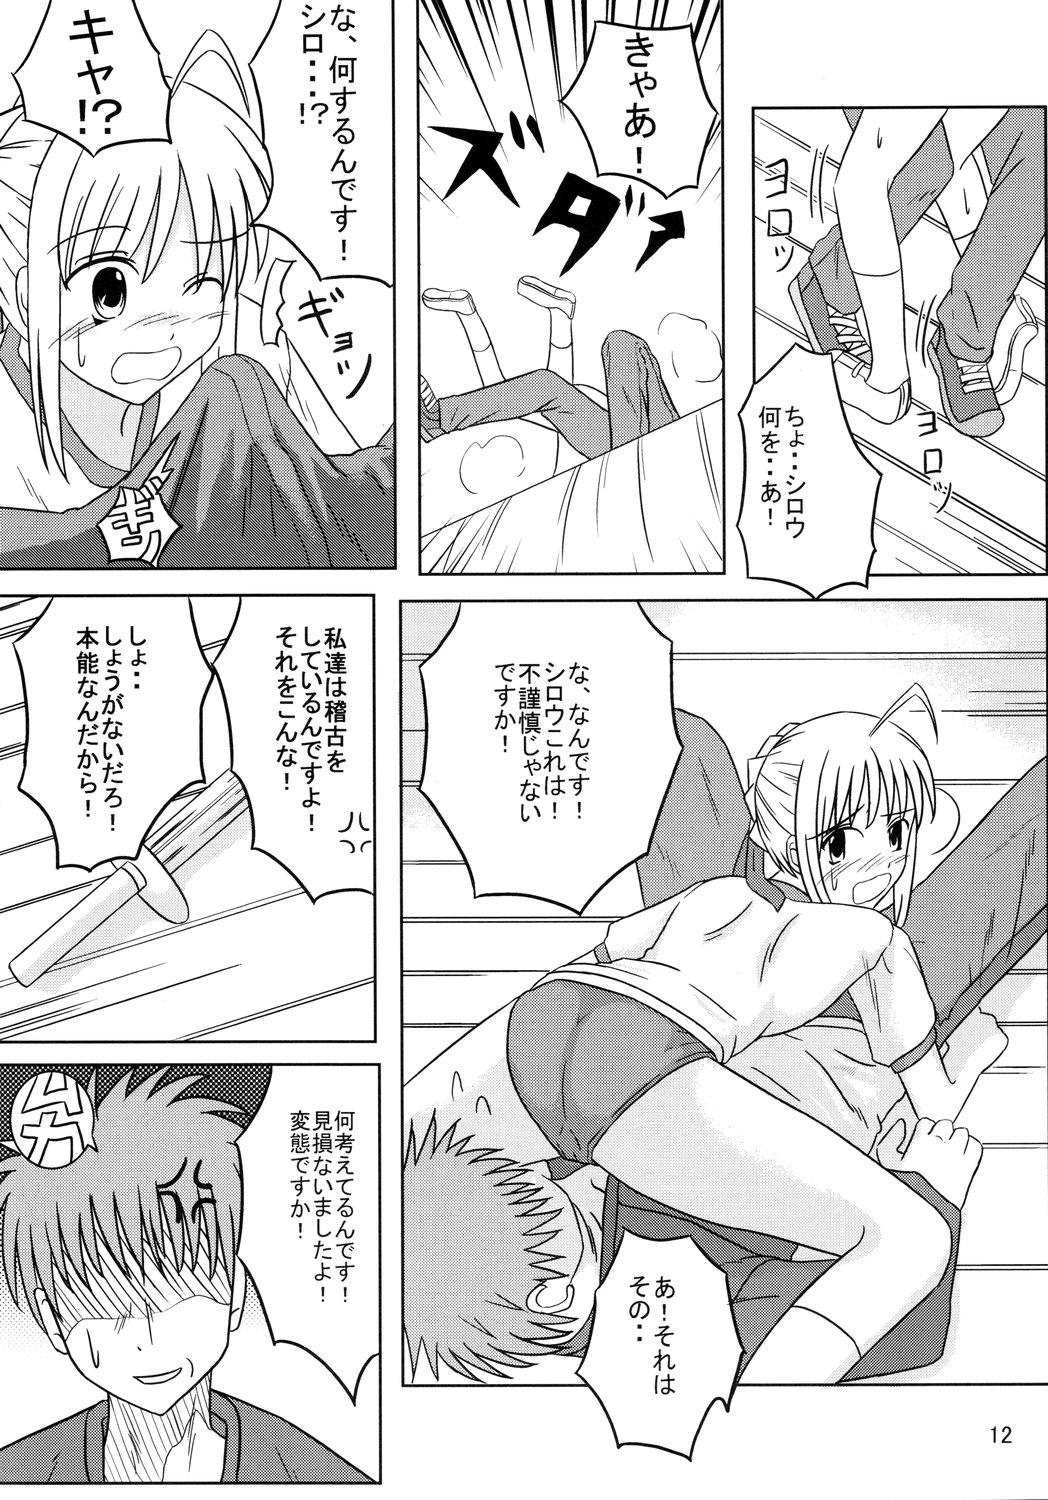 Bisex Saber Of Sanity - Fate stay night Handsome - Page 11